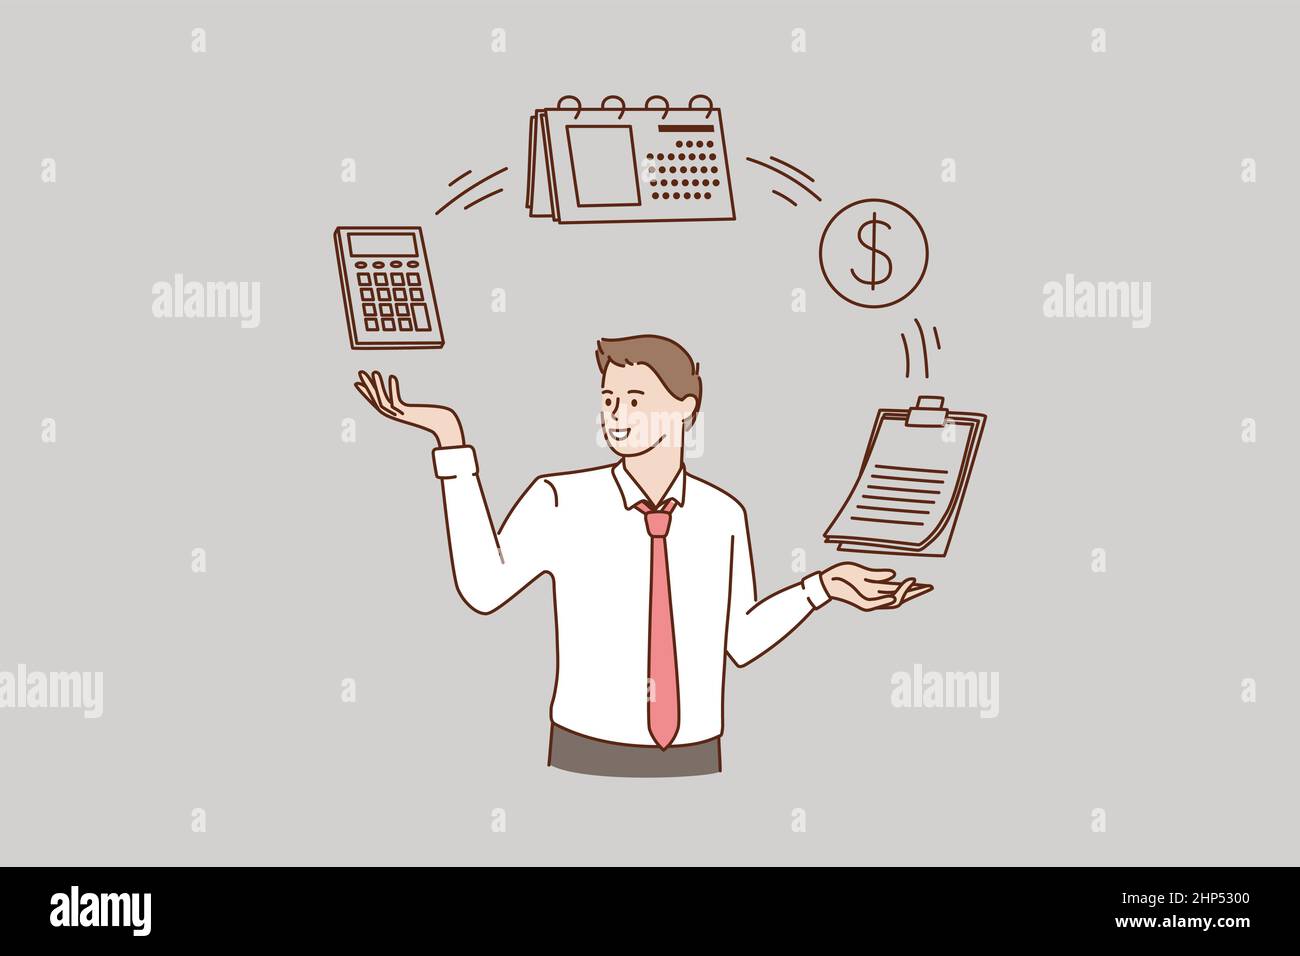 Man use calculator mange company budget or expenses Stock Vector